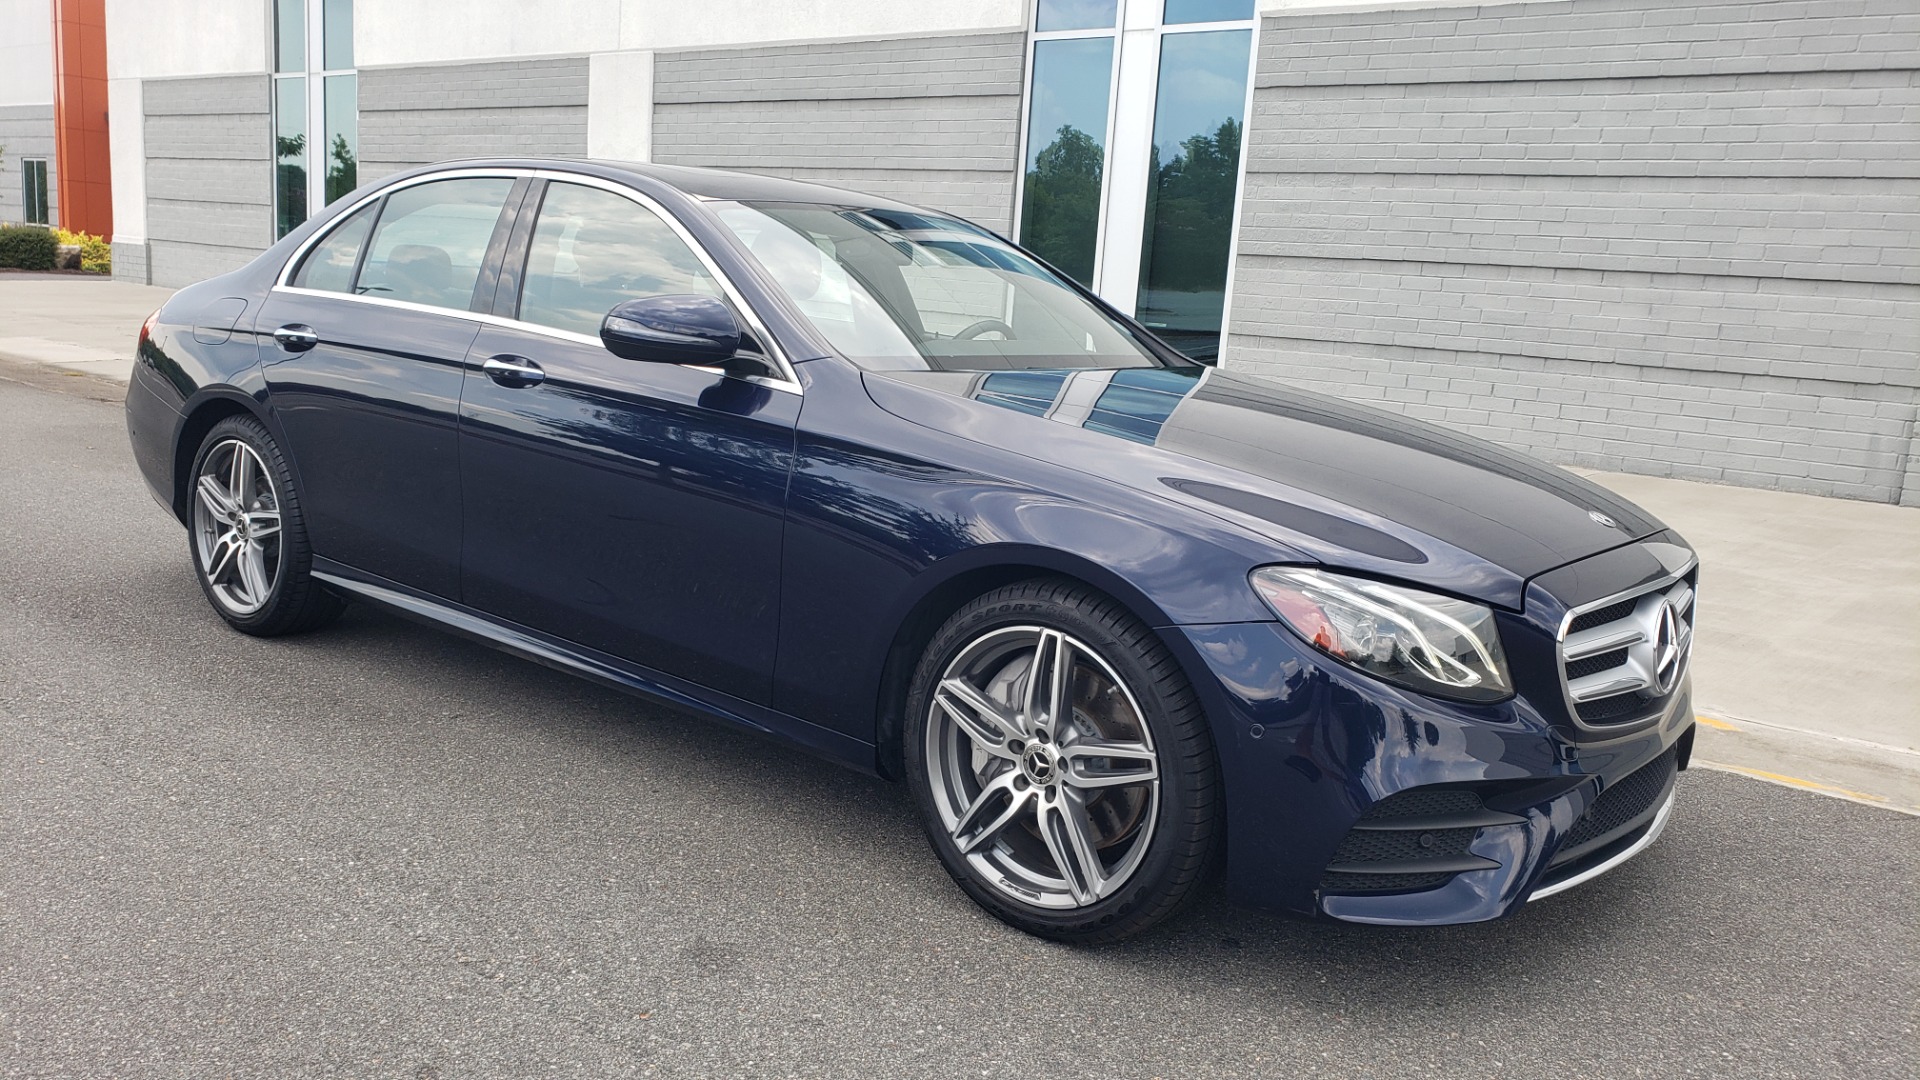 Used 2018 Mercedes-Benz E-CLASS E 300 PREMIUM / AMG LINE / PARK ASST / BURMESTER / SUNROOF / REARVIEW for sale Sold at Formula Imports in Charlotte NC 28227 7